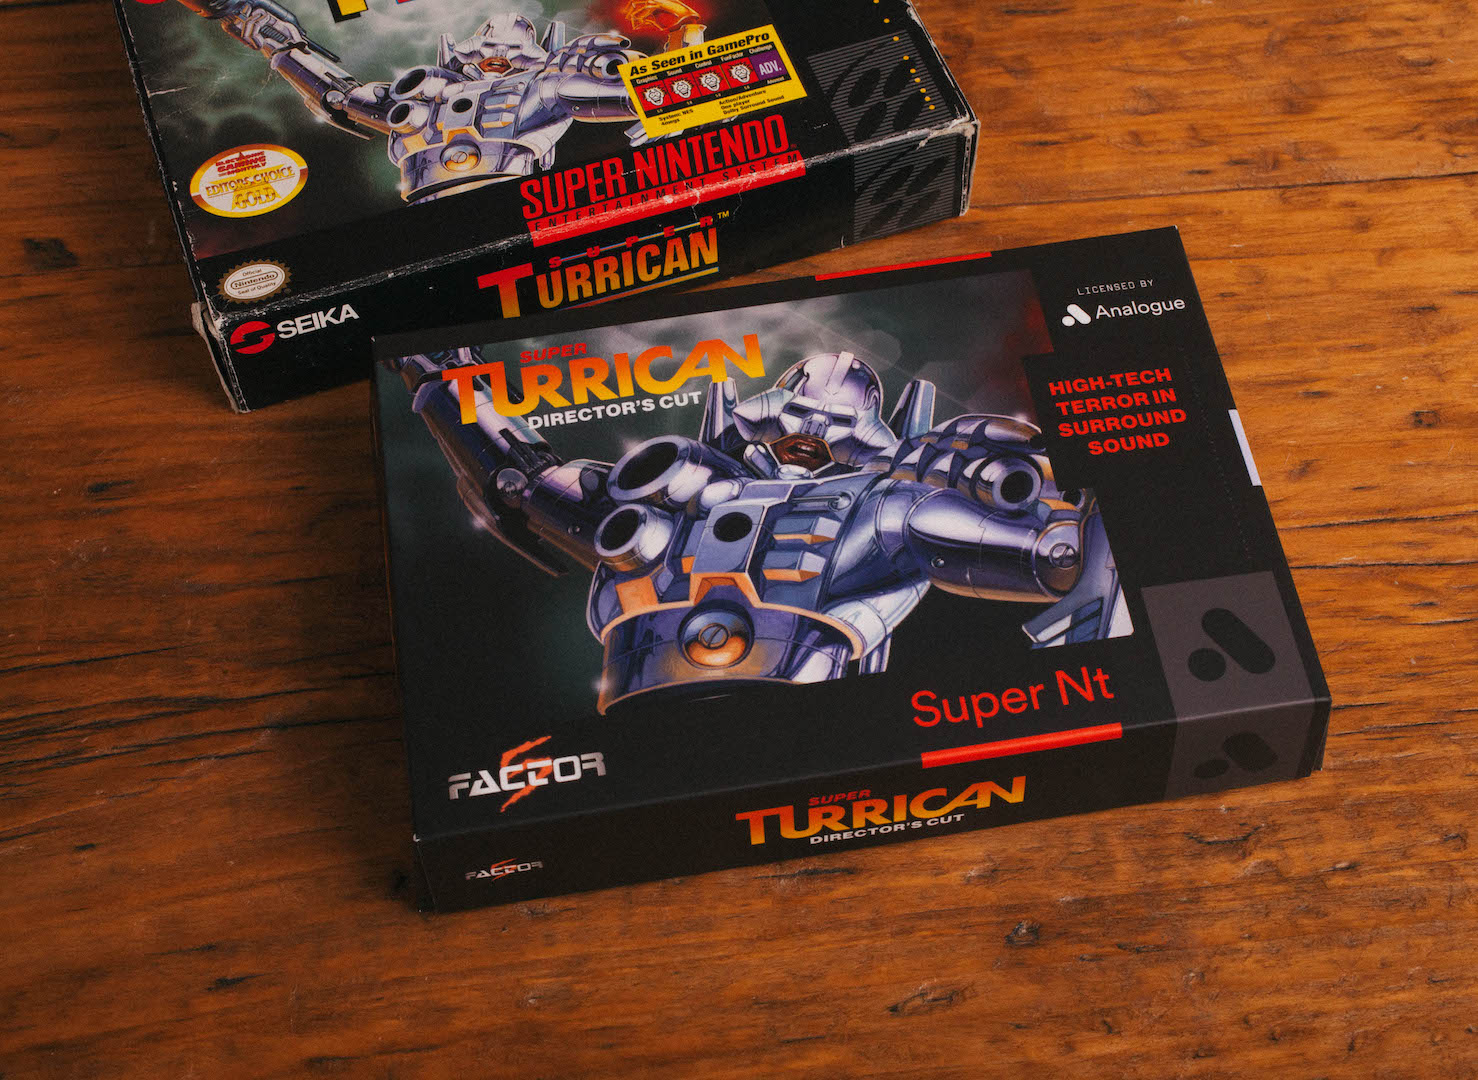 Analogue’s Super Nt comes with two SNES games, including a ‘Director’s Cut’